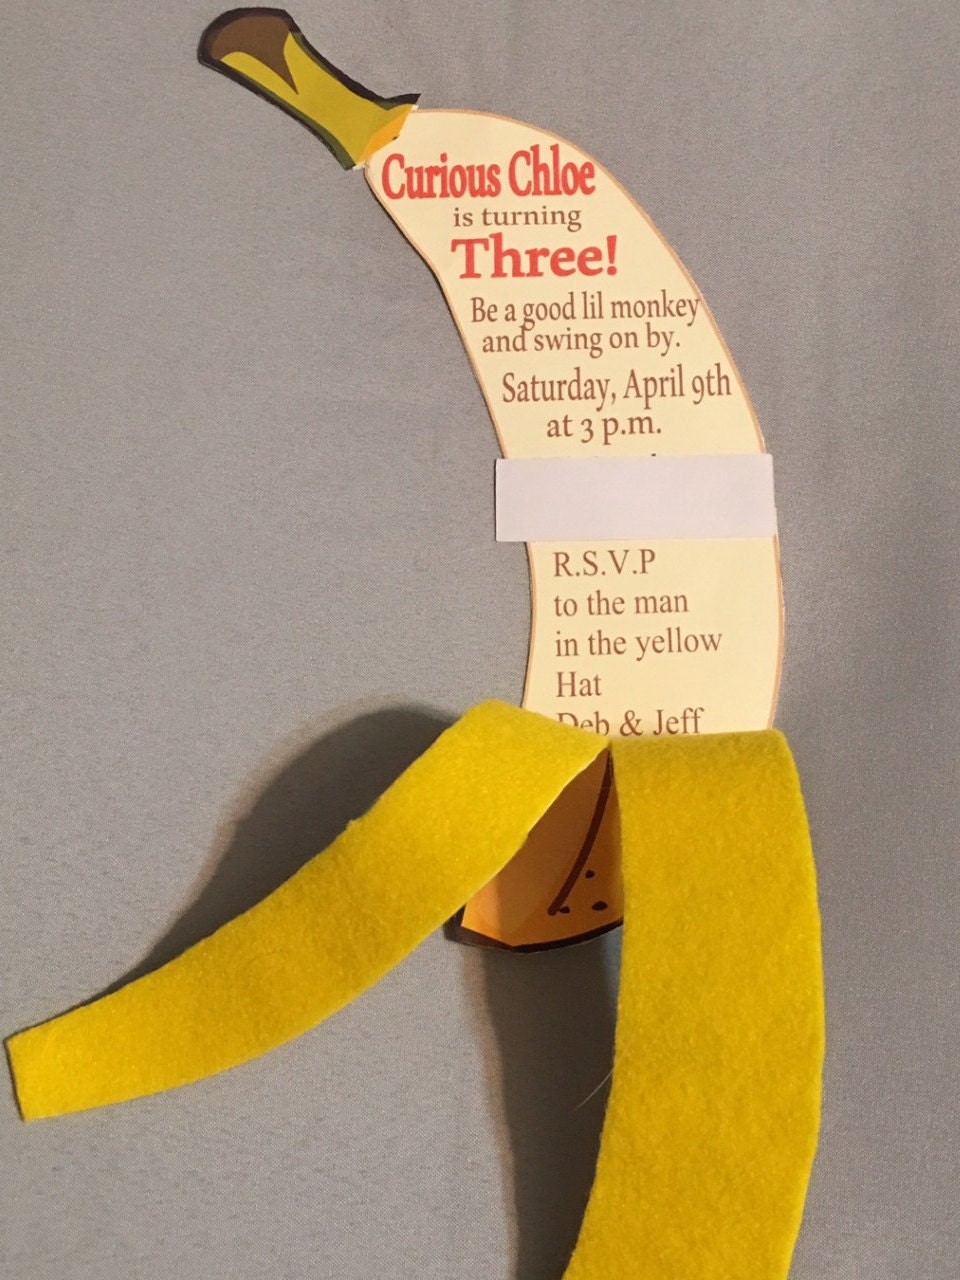 Curious George Invitations/ curious george inspired banana invitations.  Set of 12 invites and envelopes